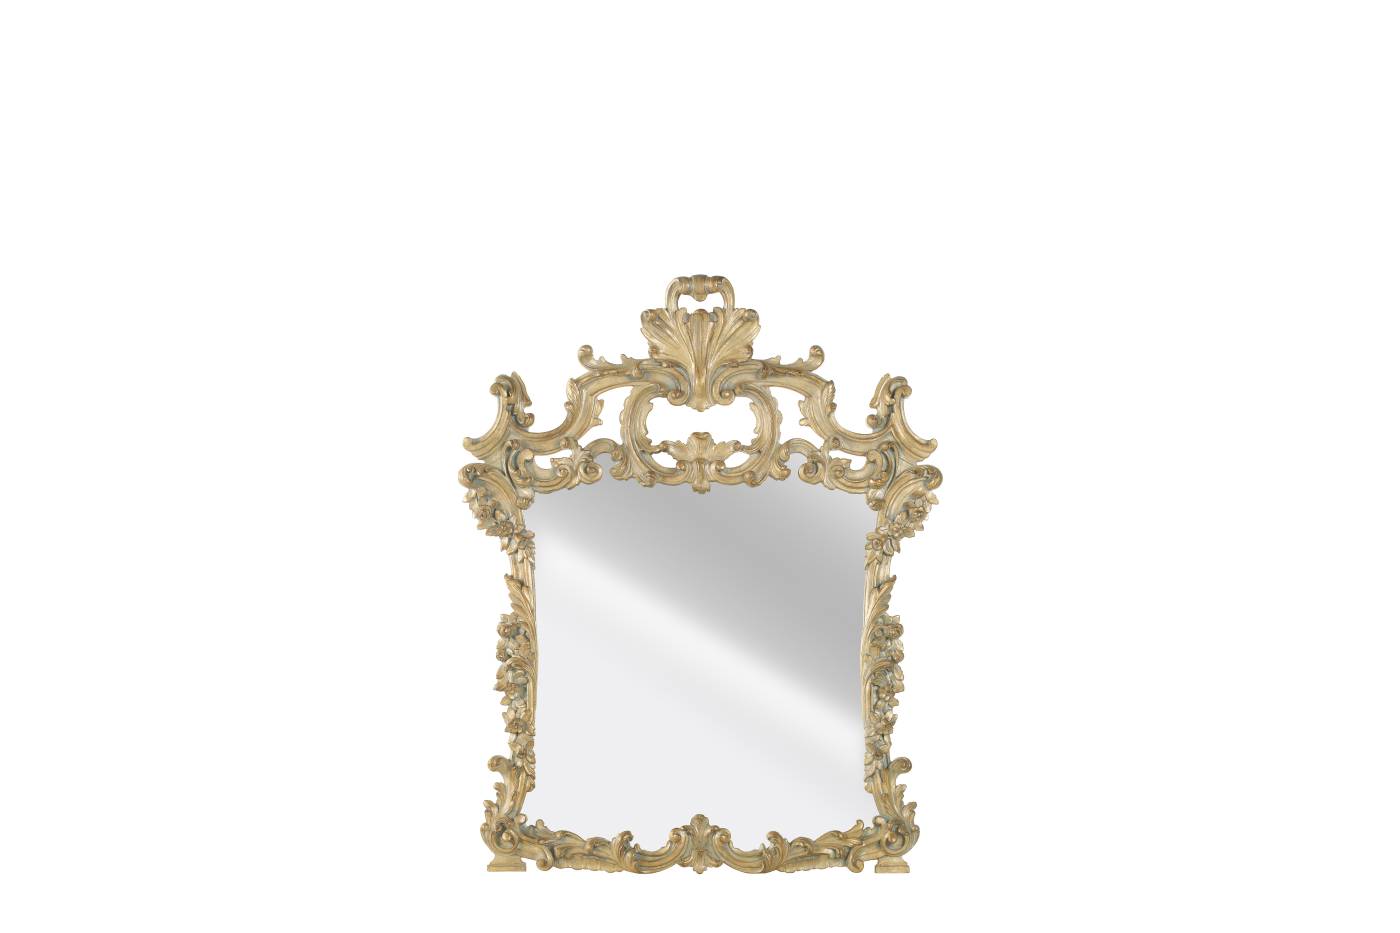 SCARLETT mirror - Bespoke projects with luxury Made in Italy classic furniture